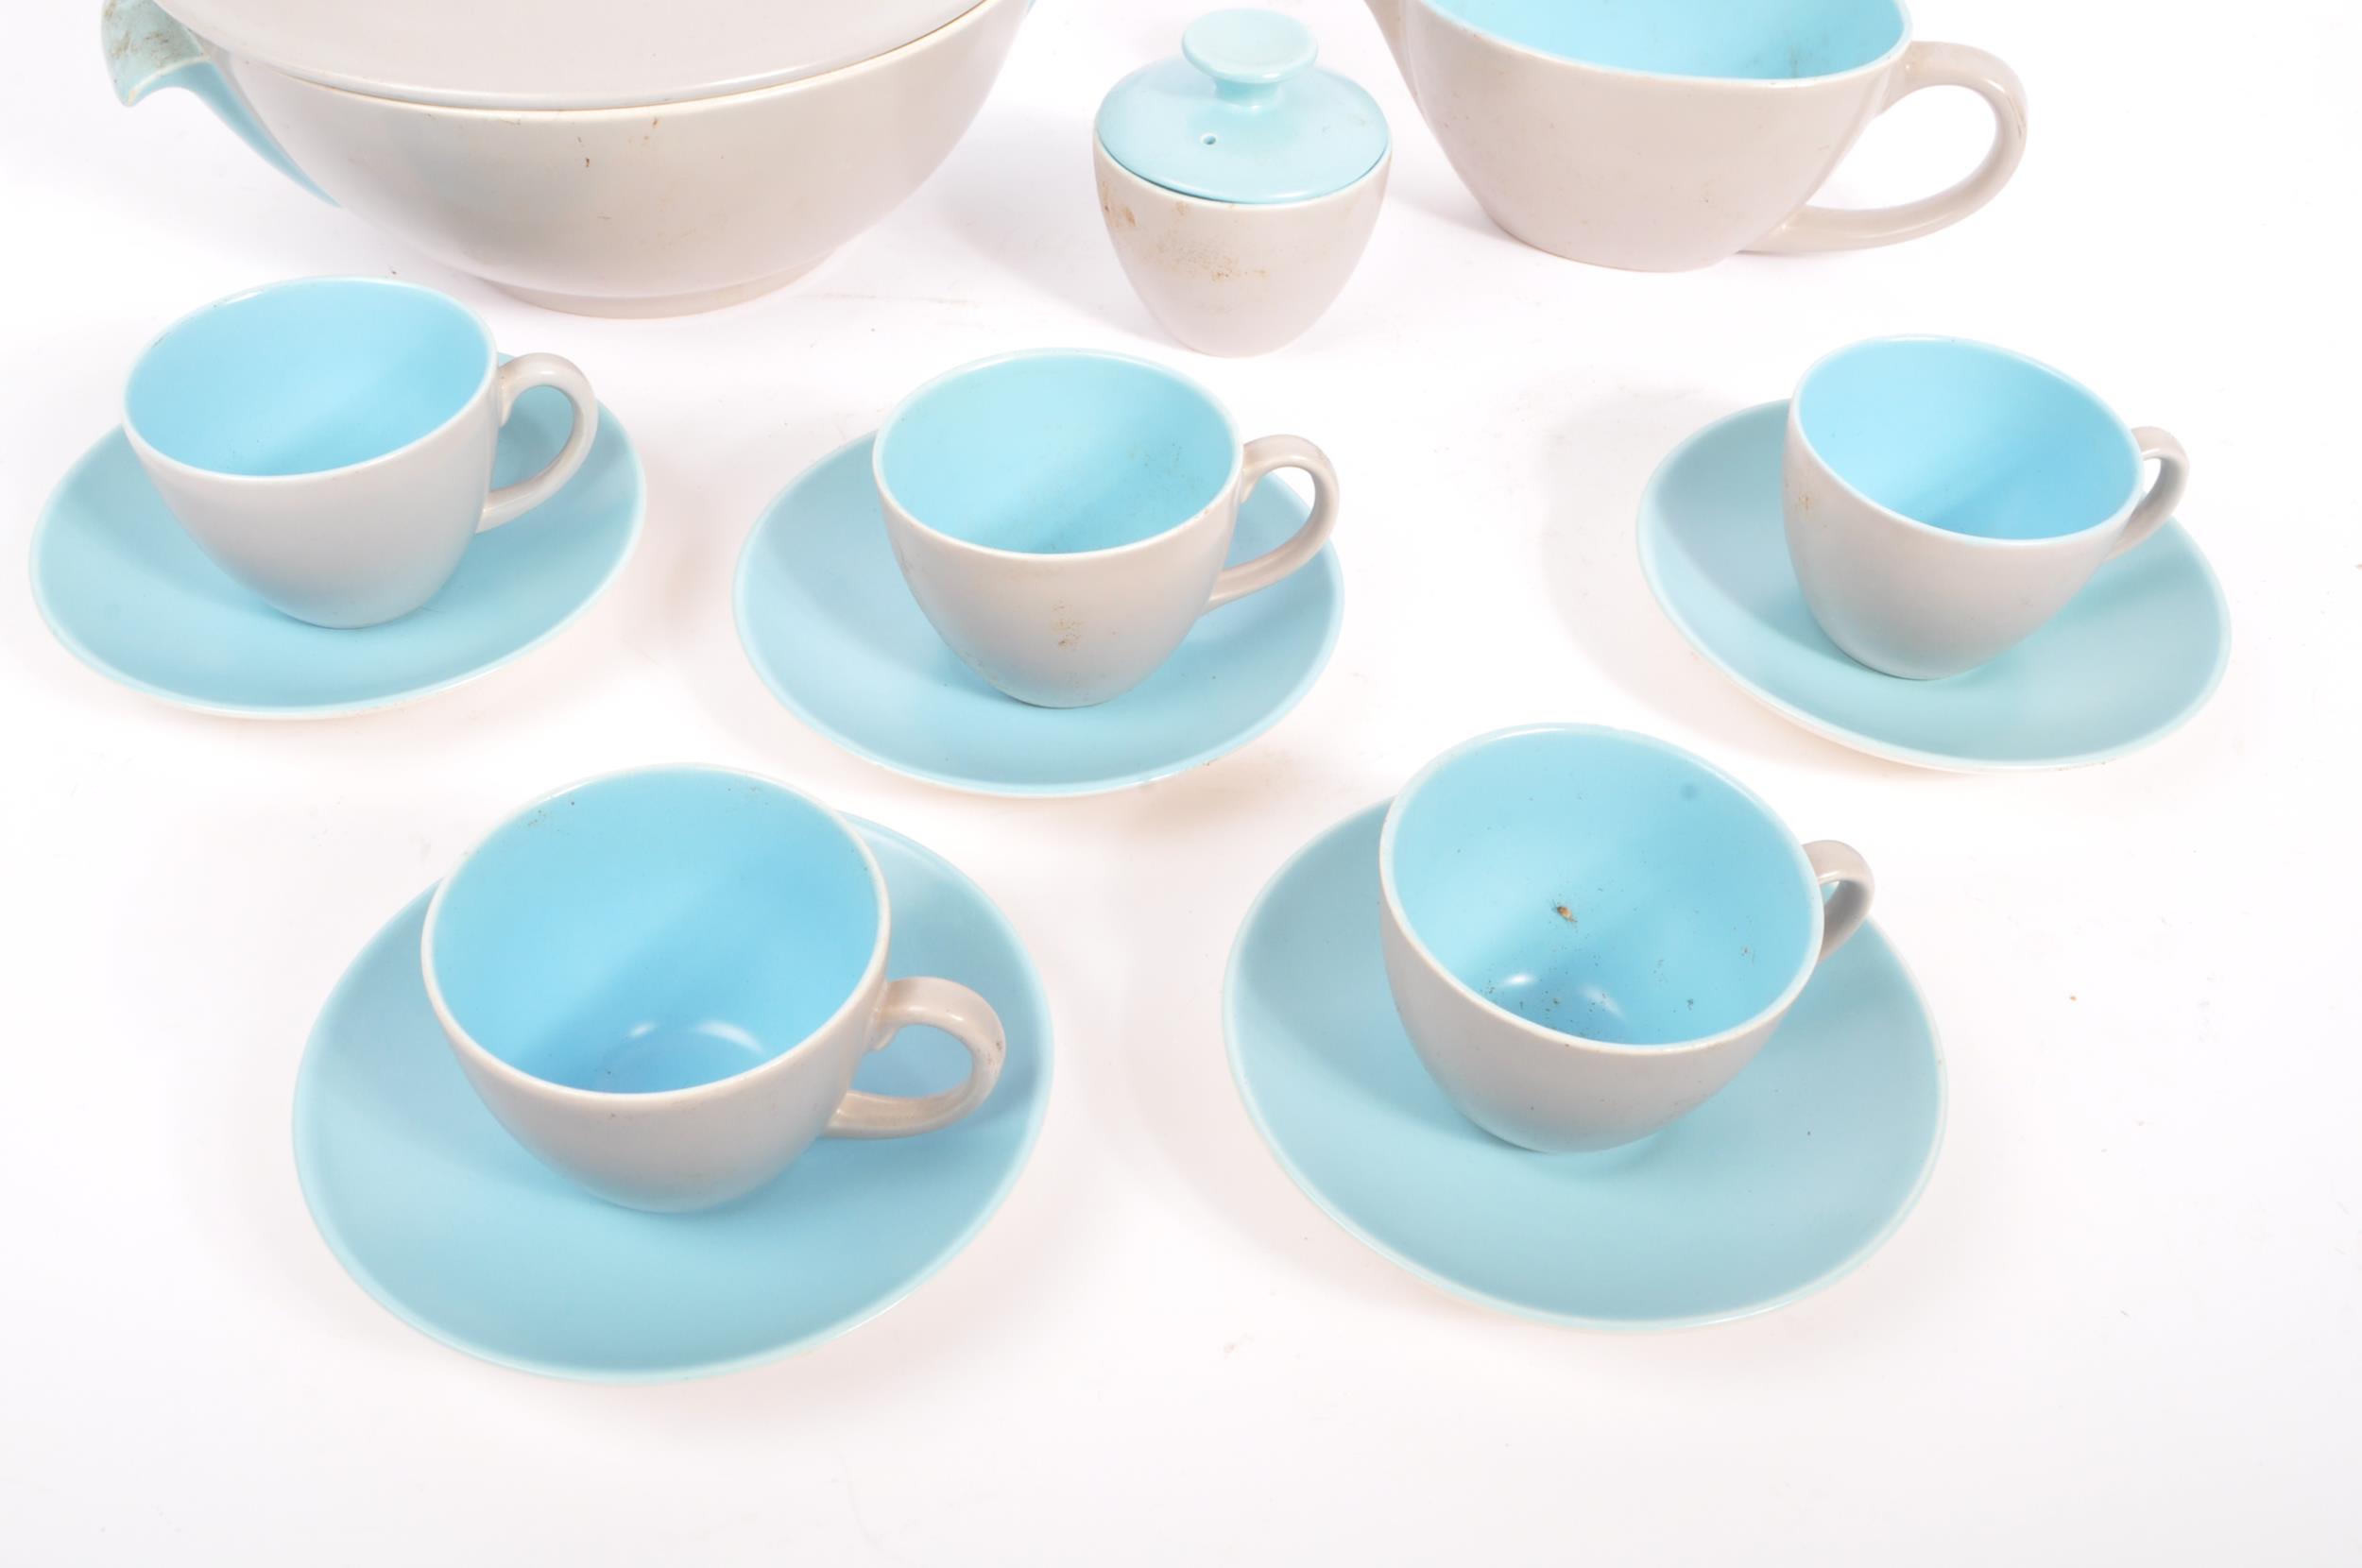 VINTAGE GREY & SKY BLUE TWINTONE SERVICE BY POOLE POTTERY - Image 7 of 8